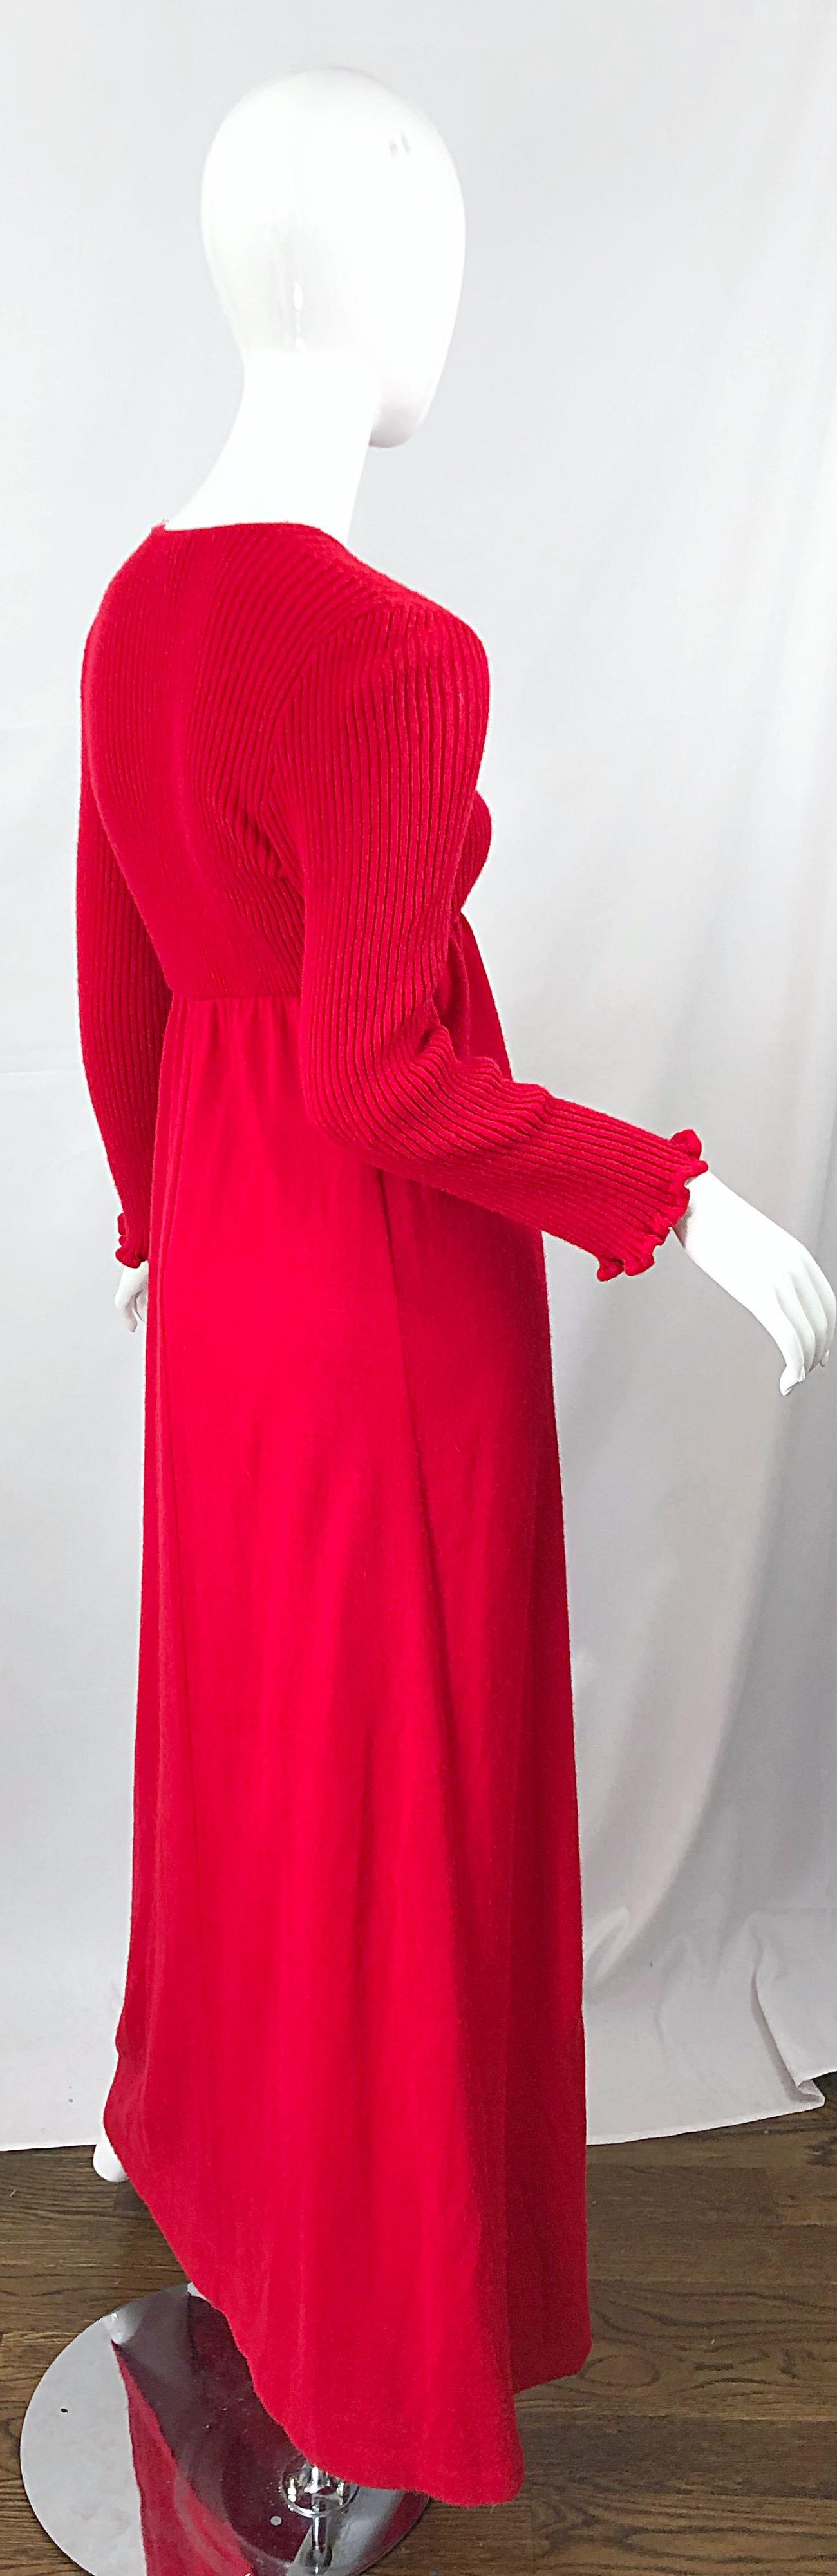 Vintage Joseph Magnin 1970s Lipstick Red Long Sleeve Wool 70s Sweater Maxi Dress For Sale 5